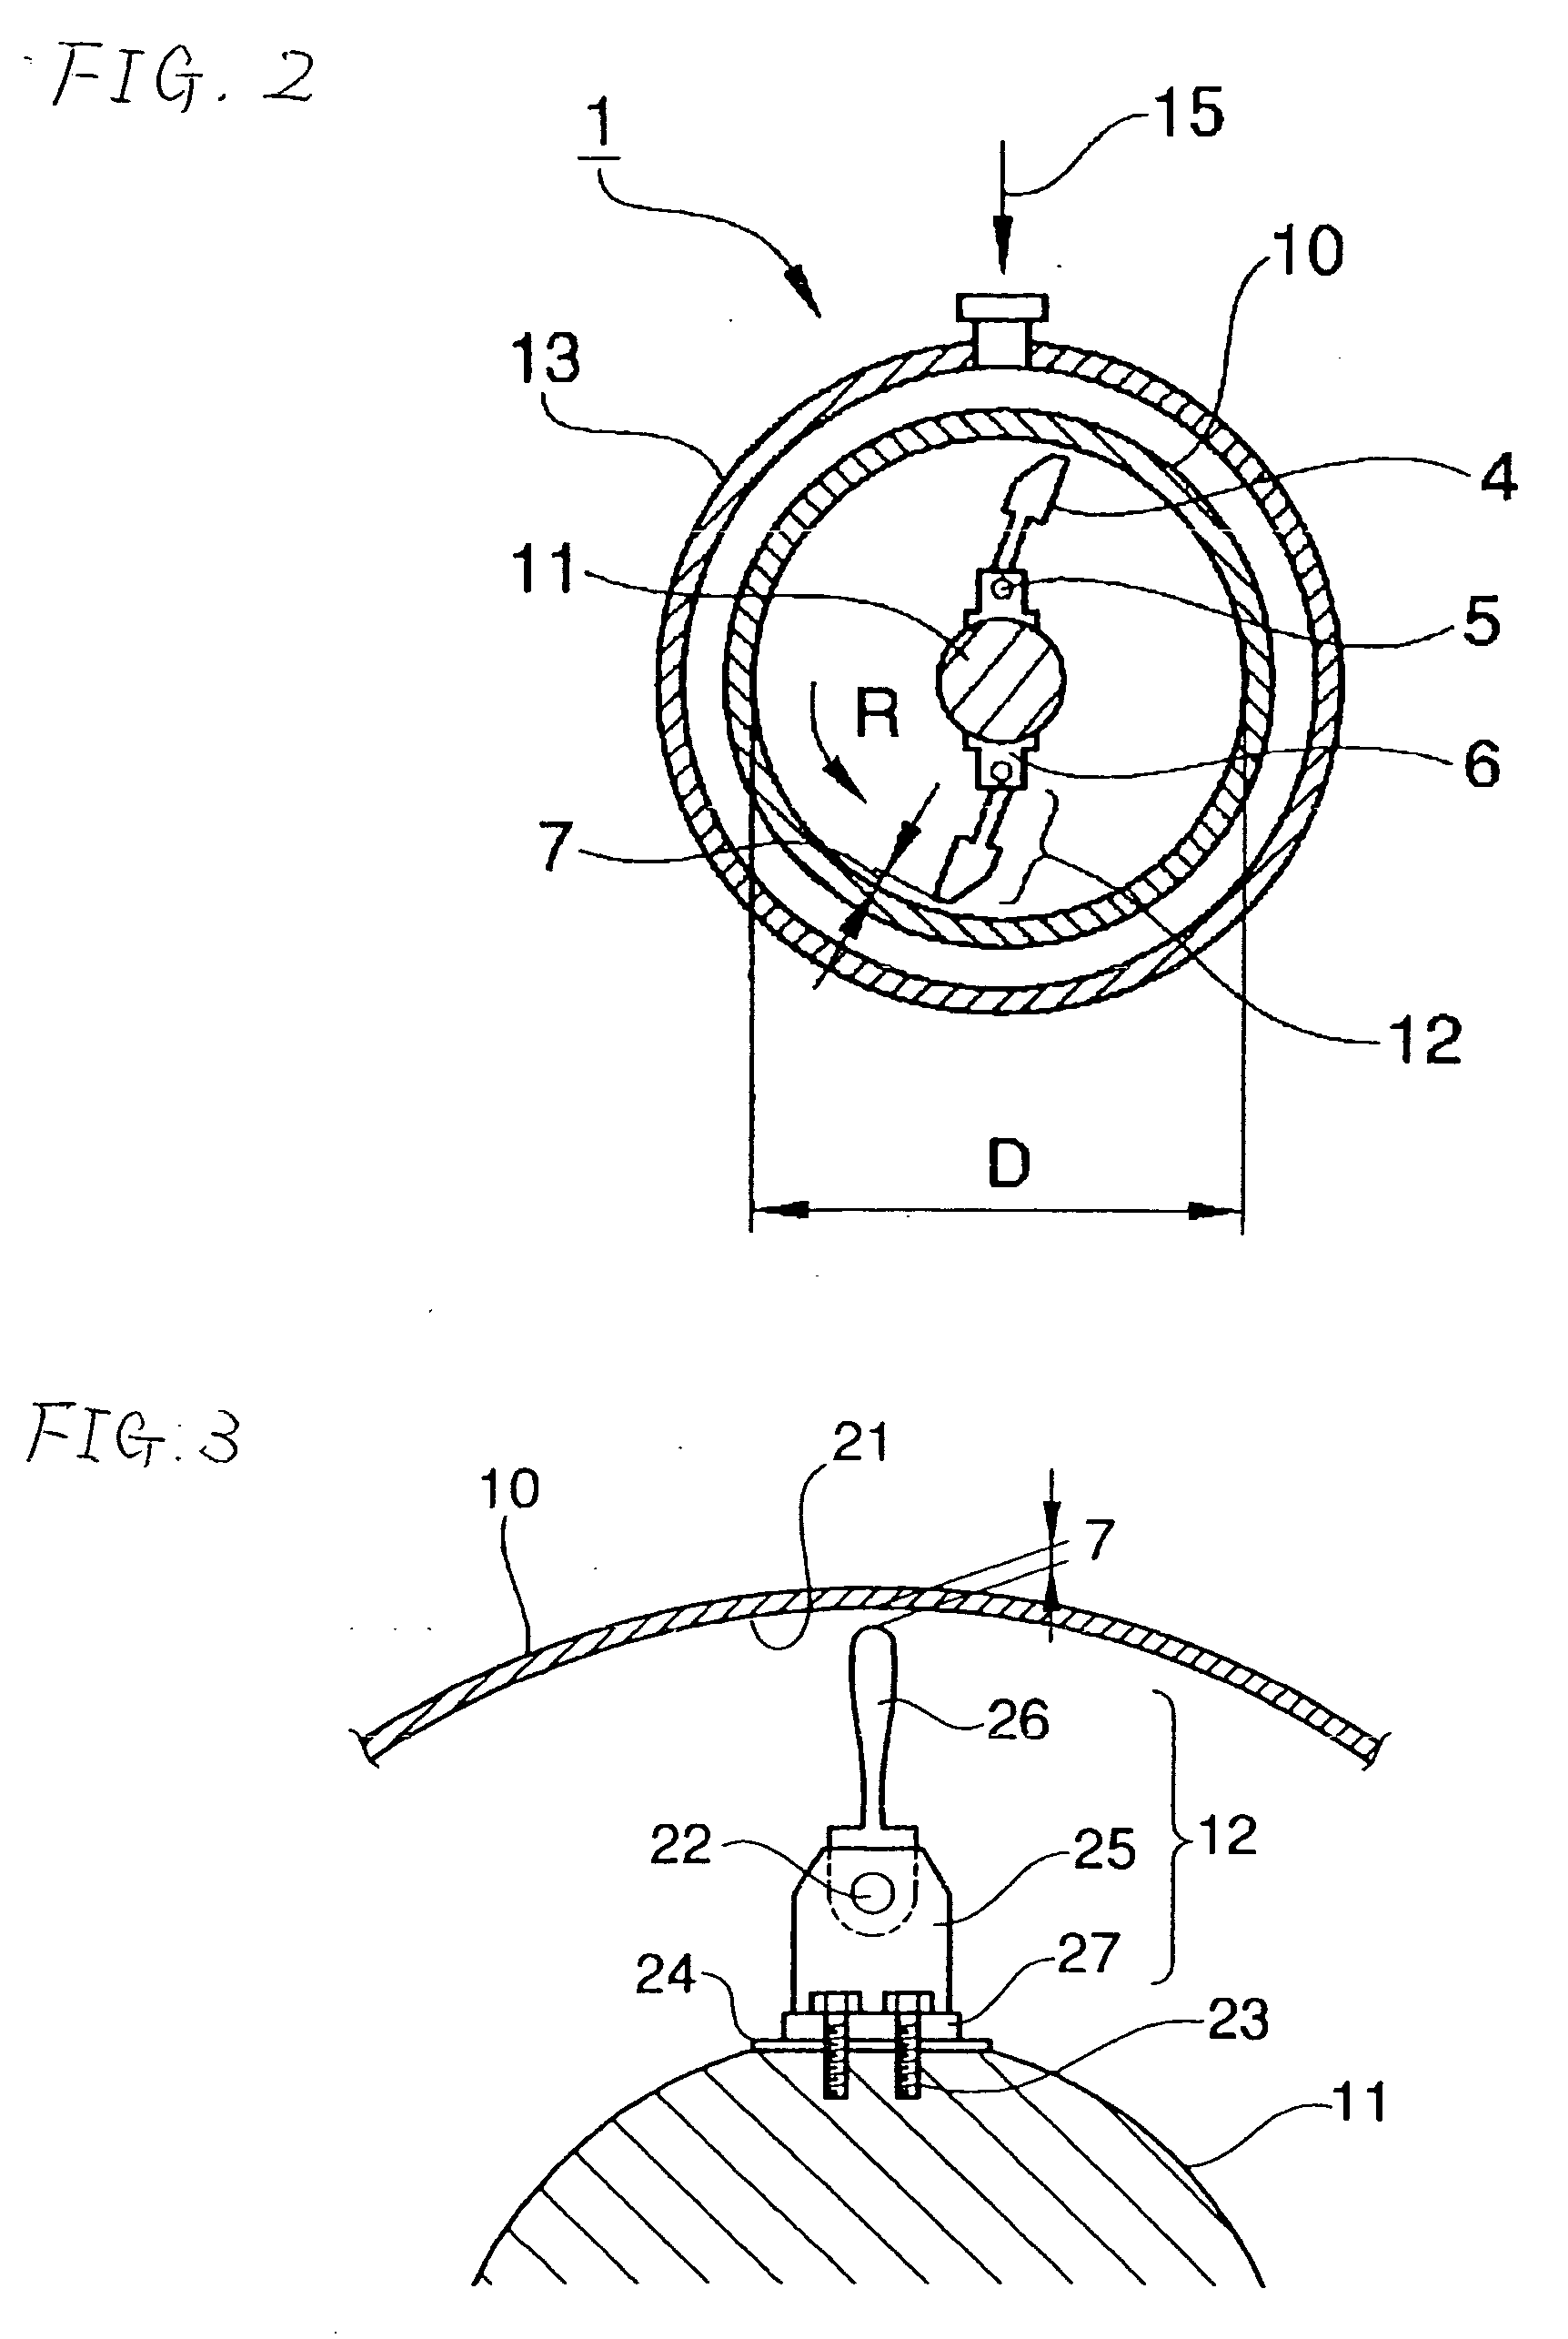 Thin film evaporating concentrator, method of evaporating and solidifying photographic waste solution, and reuse method of photographic waste solution